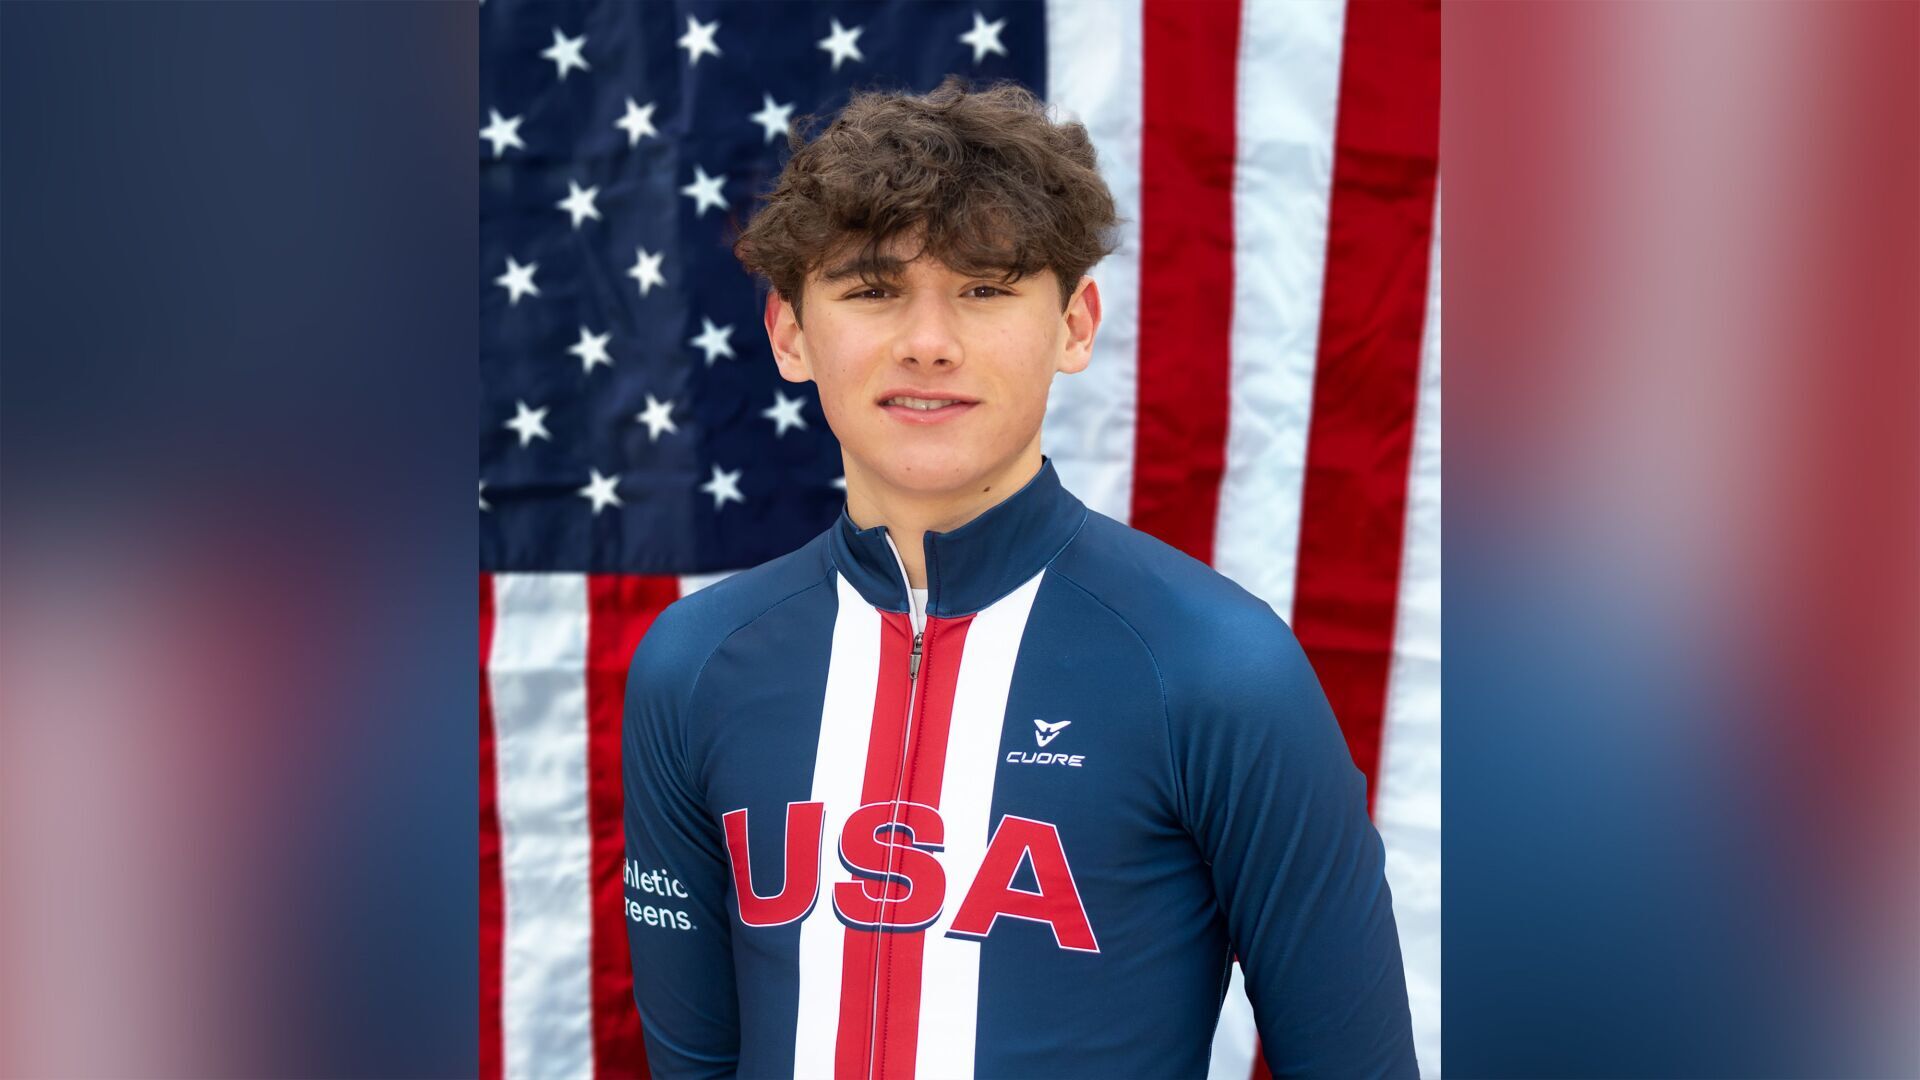 American cyclist Magnus White dies in training accident